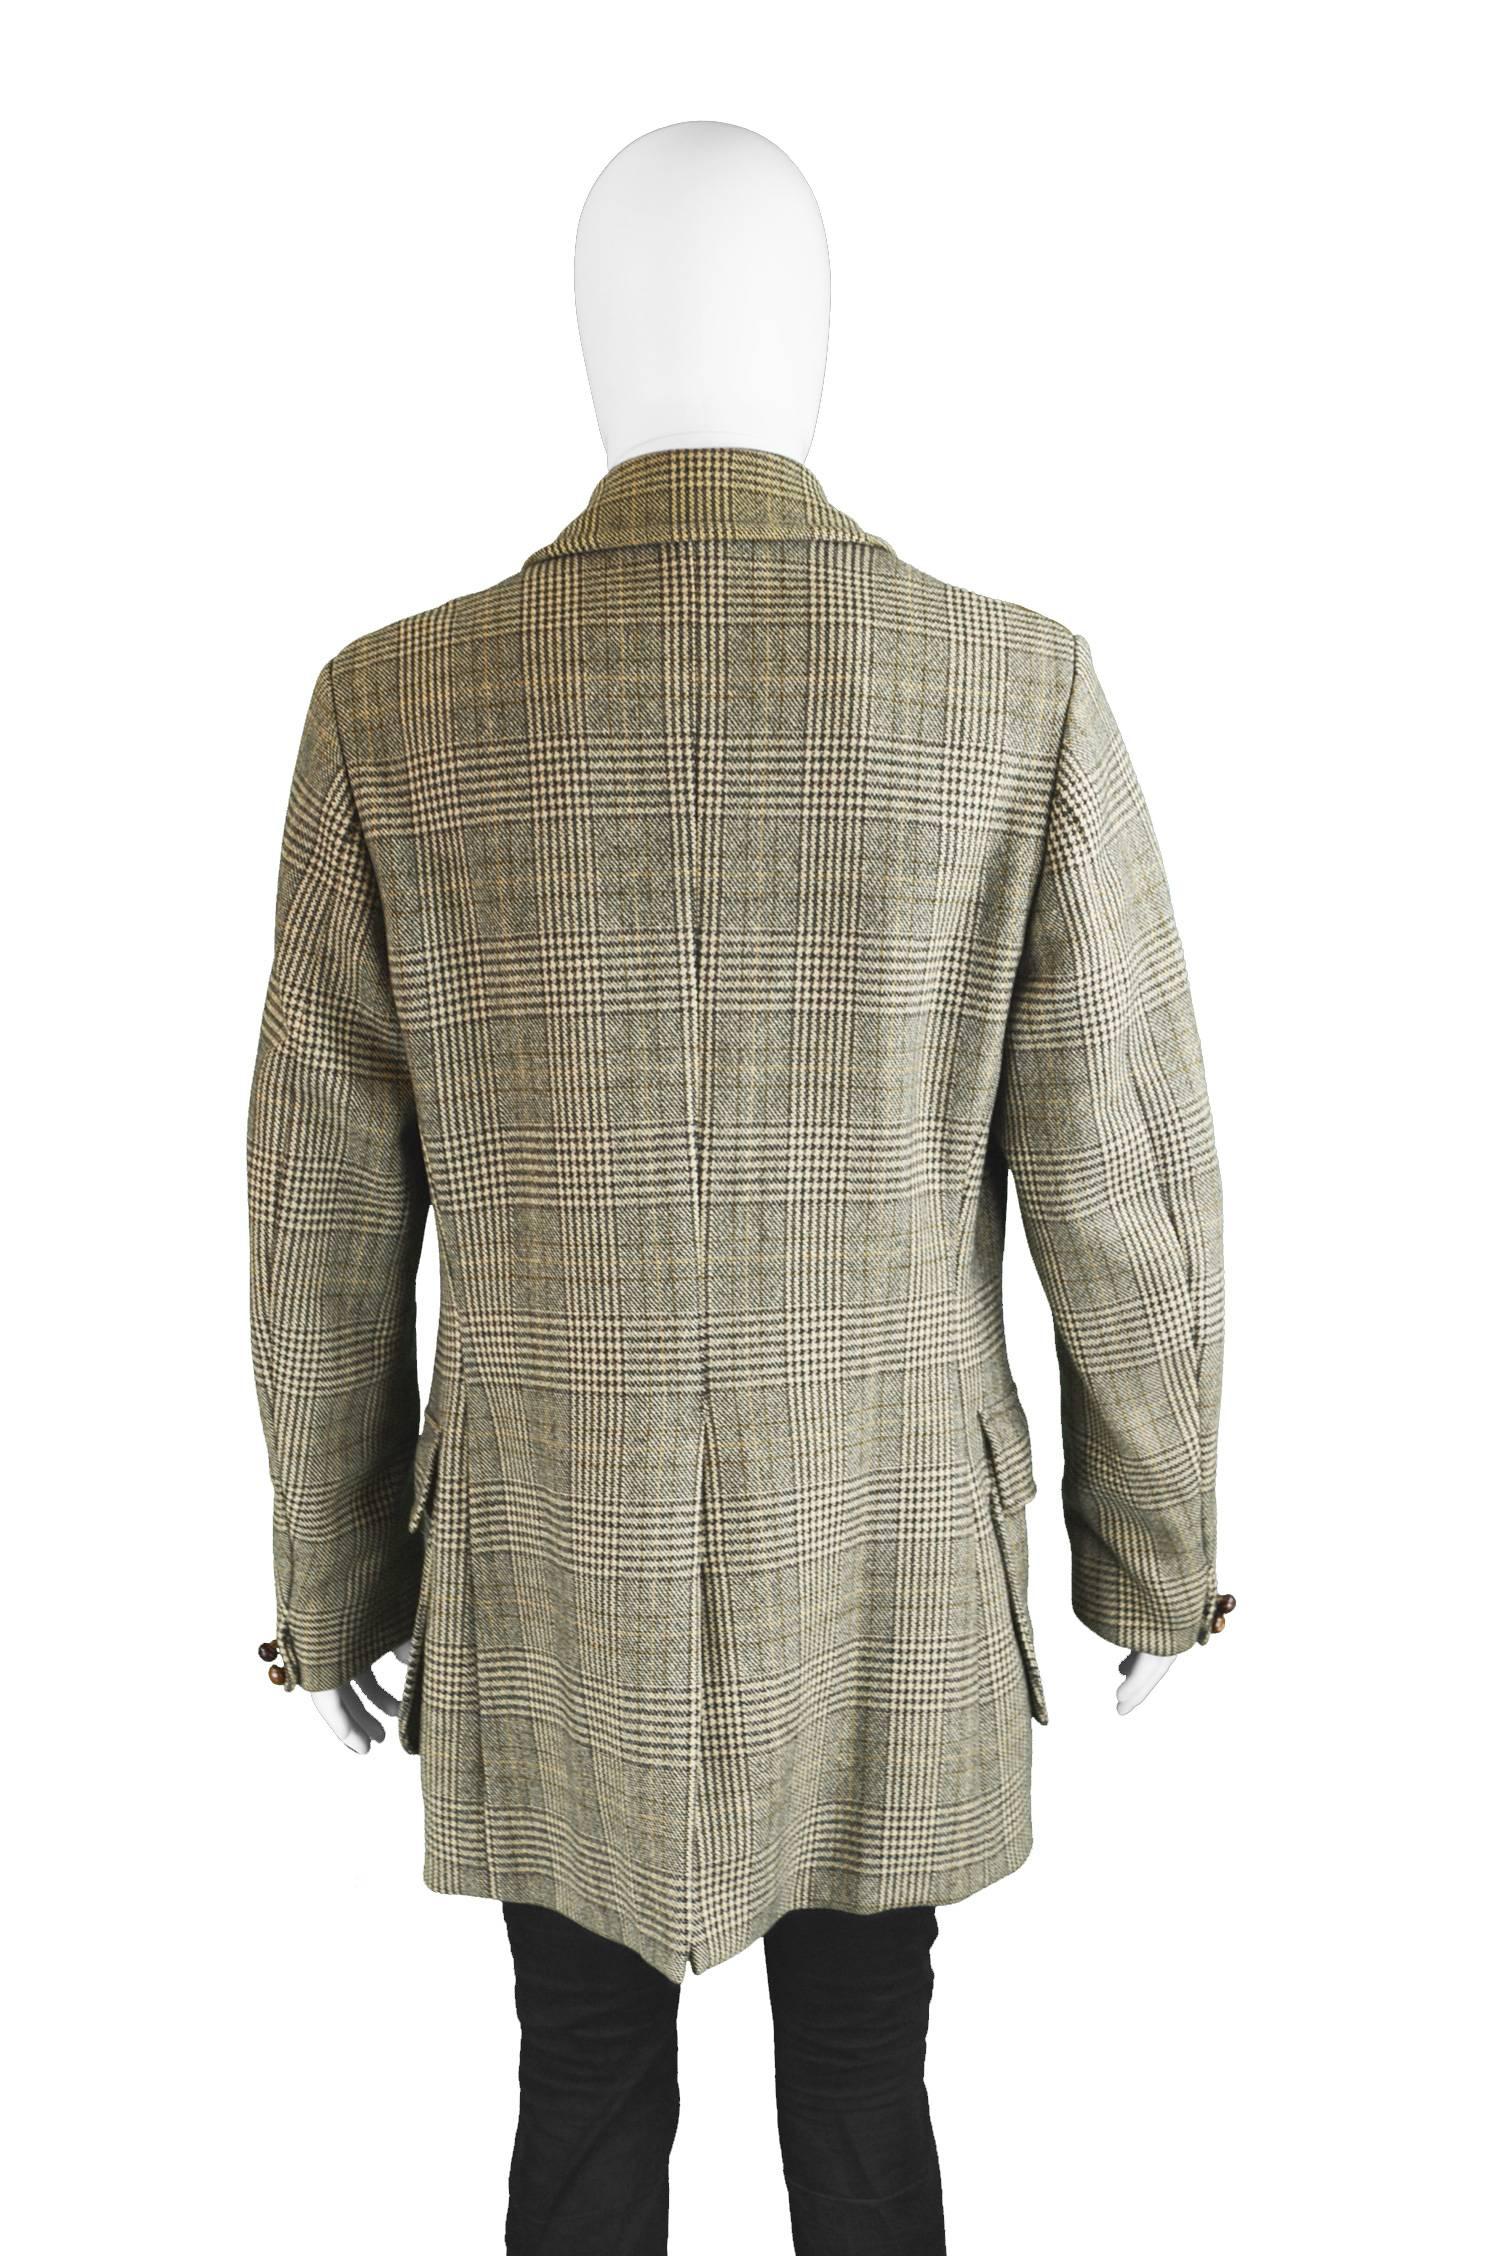 Invertere for Simpson of Piccadilly Men's Vintage Wool & Suede Coat, 1960s 1